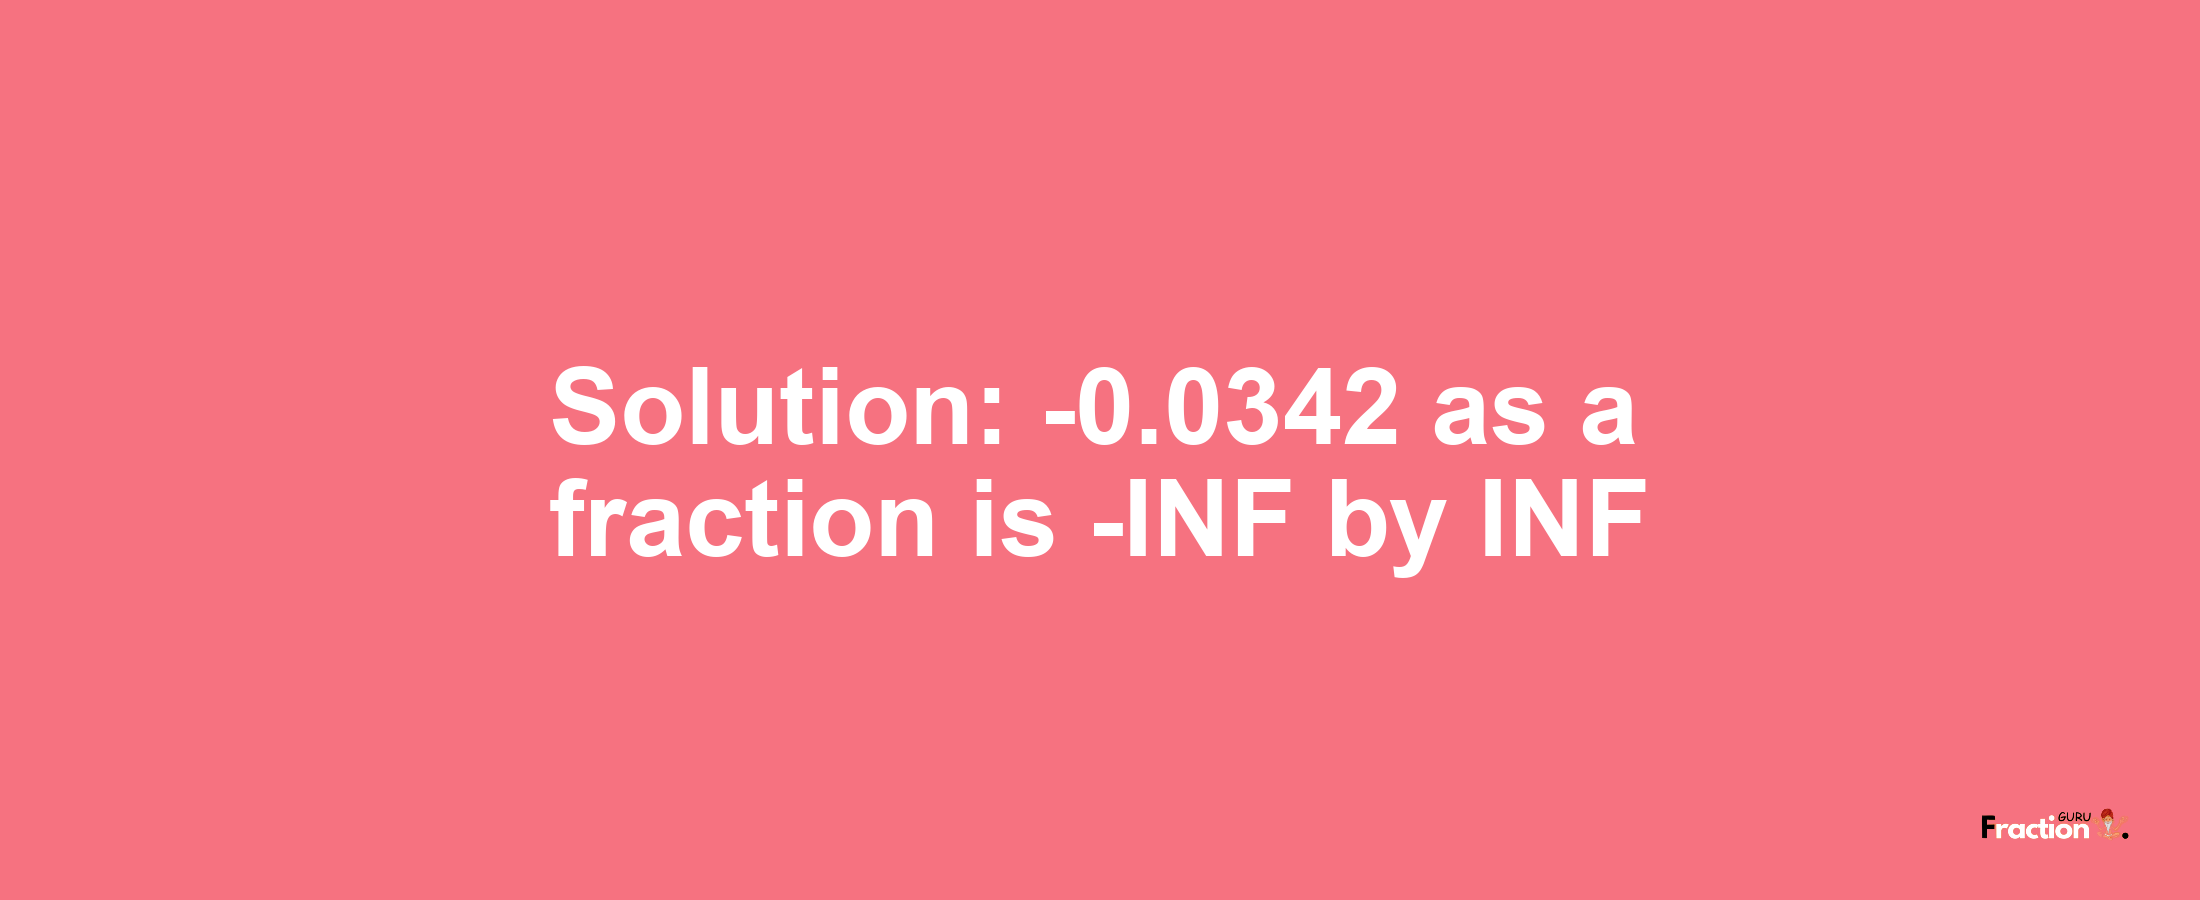 Solution:-0.0342 as a fraction is -INF/INF